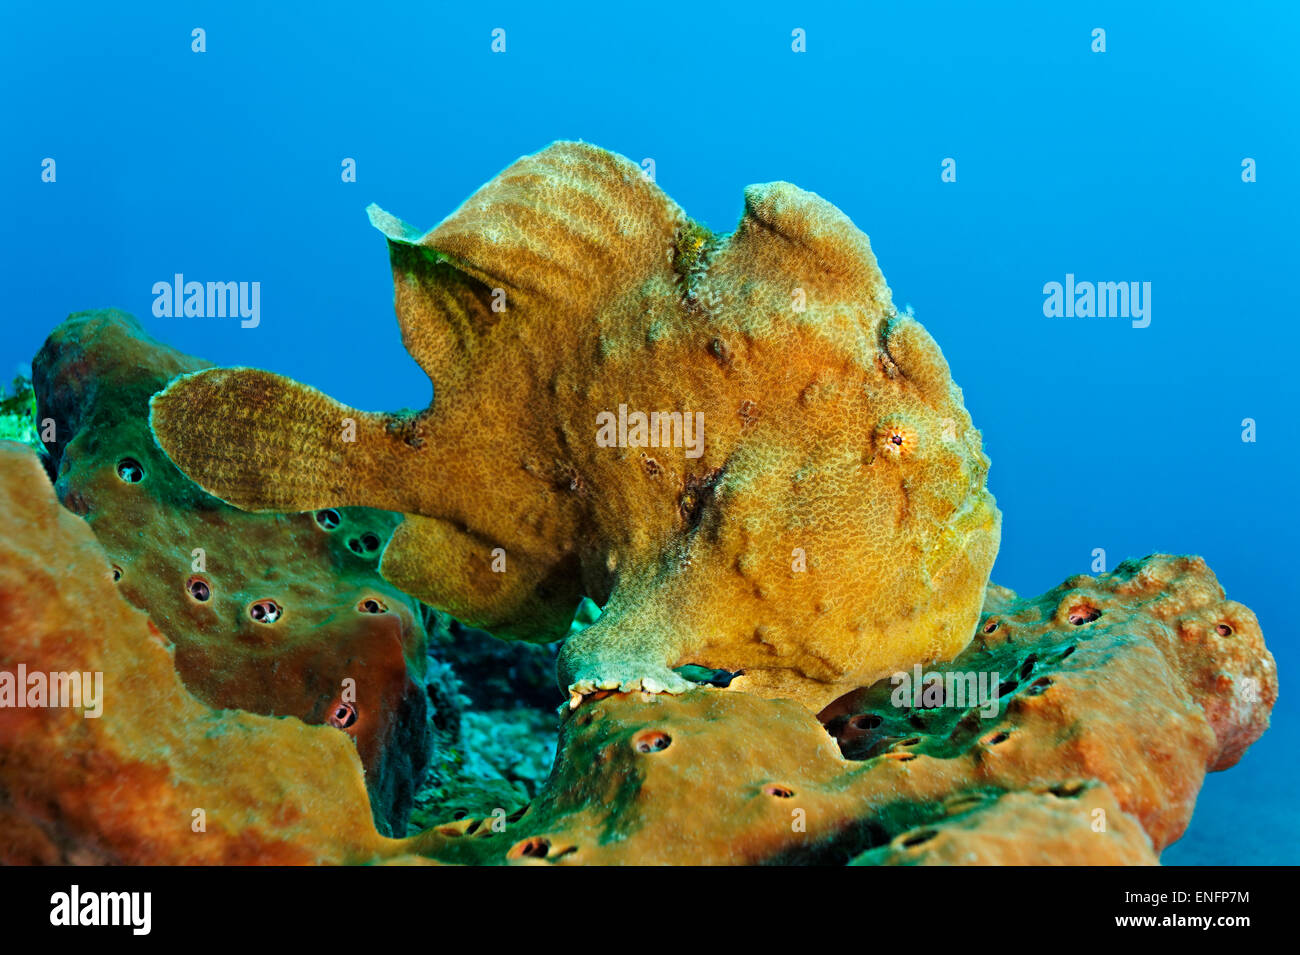 Giant frogfish (Antennarius commersonii) sitting on the coral reef sponge, Bali Stock Photo